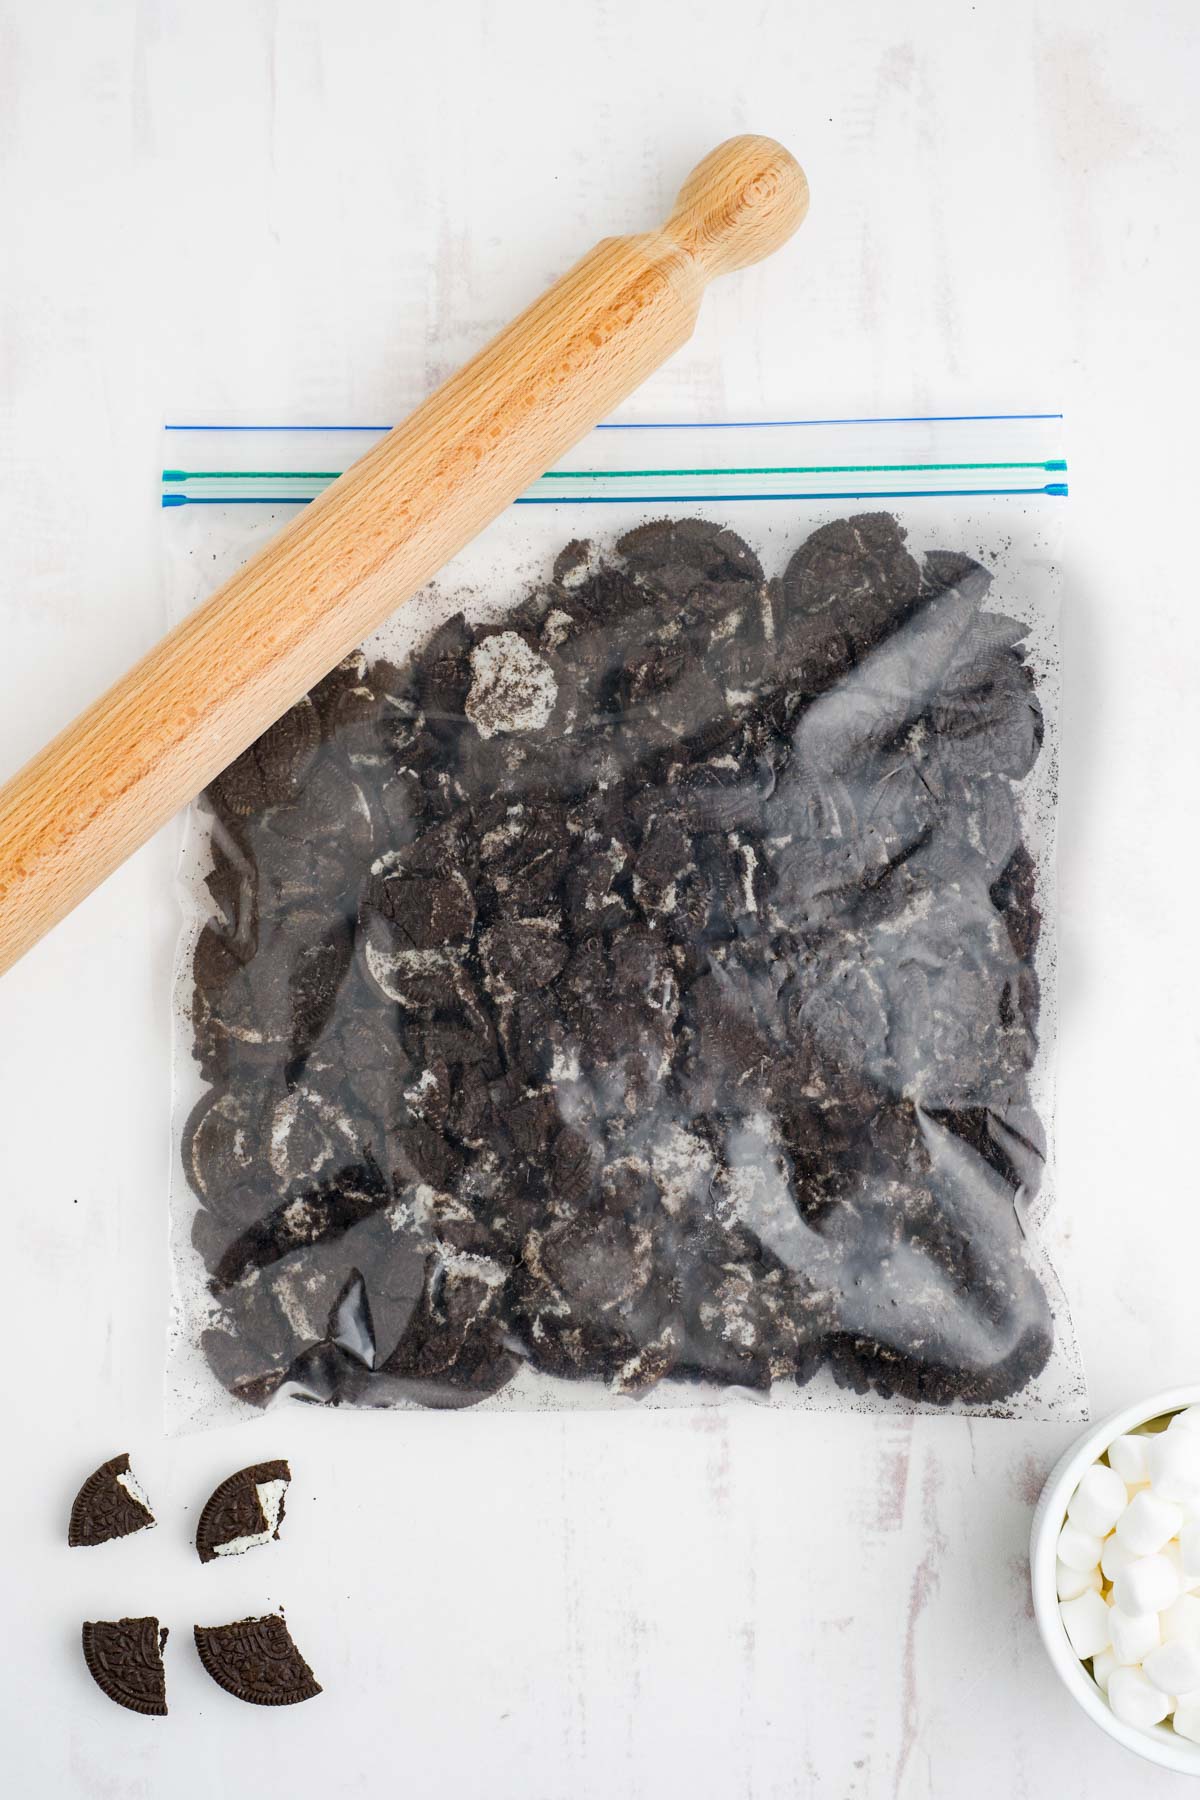 Crushed Oreo cookies in a ziploc bag with a wooden rolling pin.